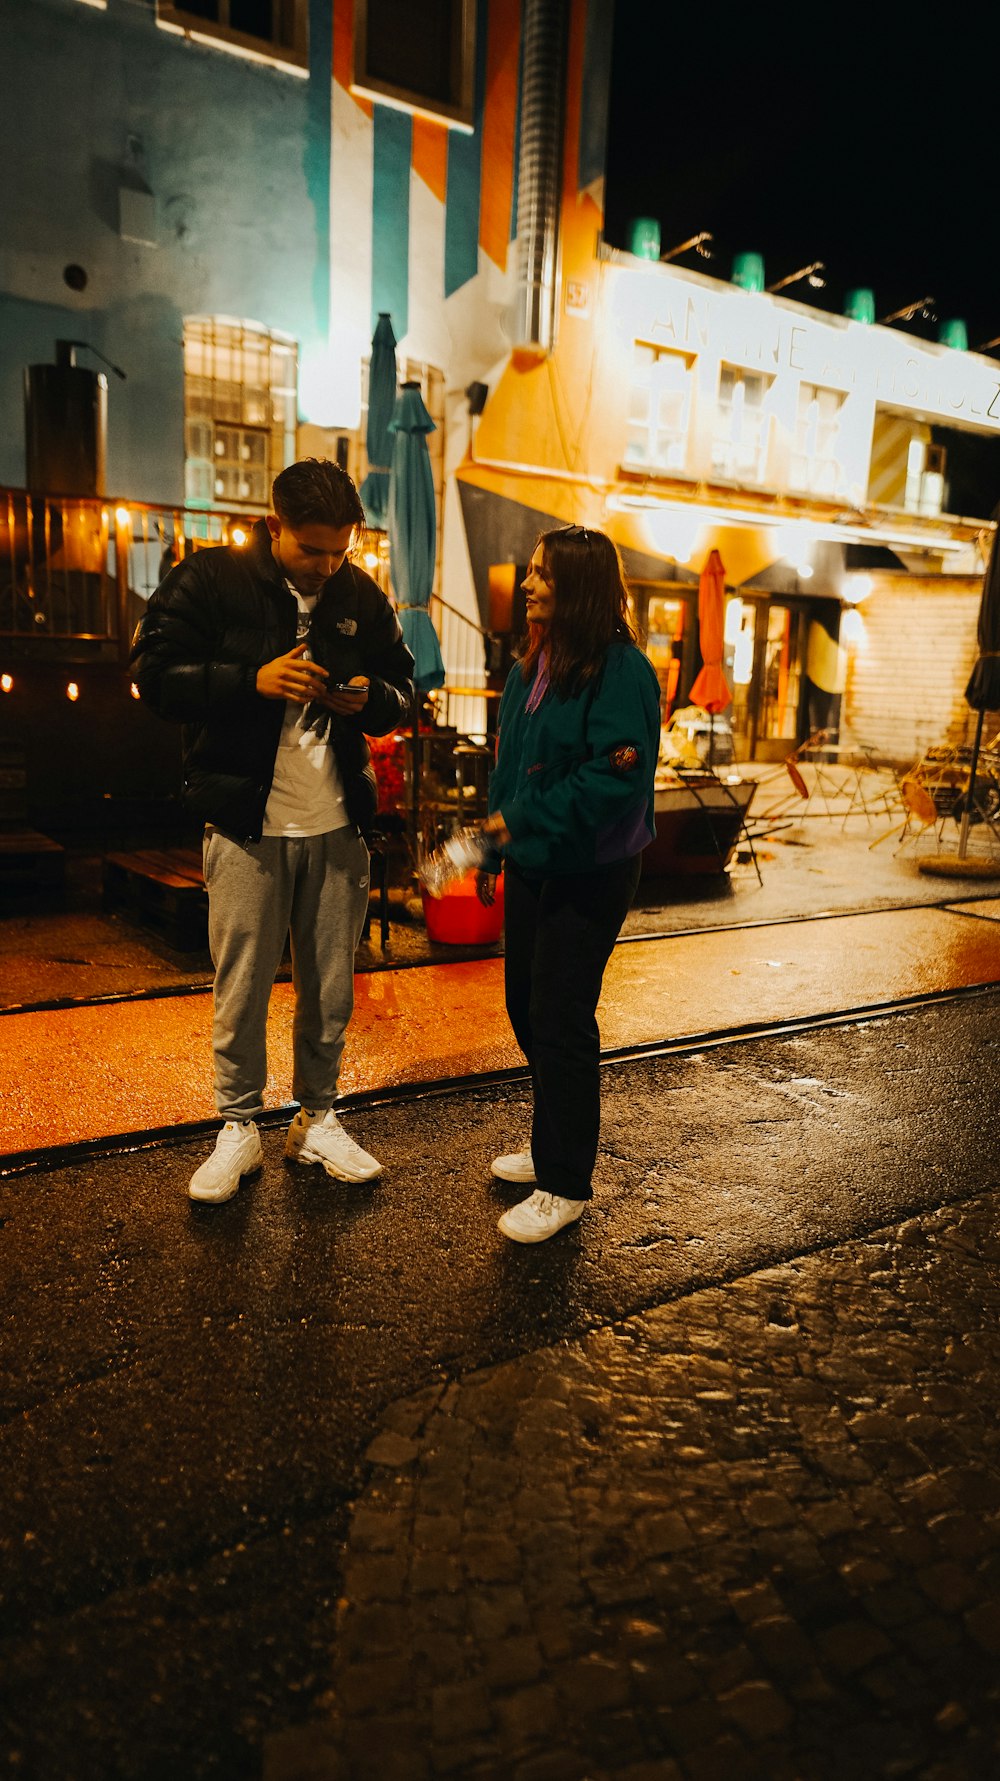 a man and a woman standing on a street corner